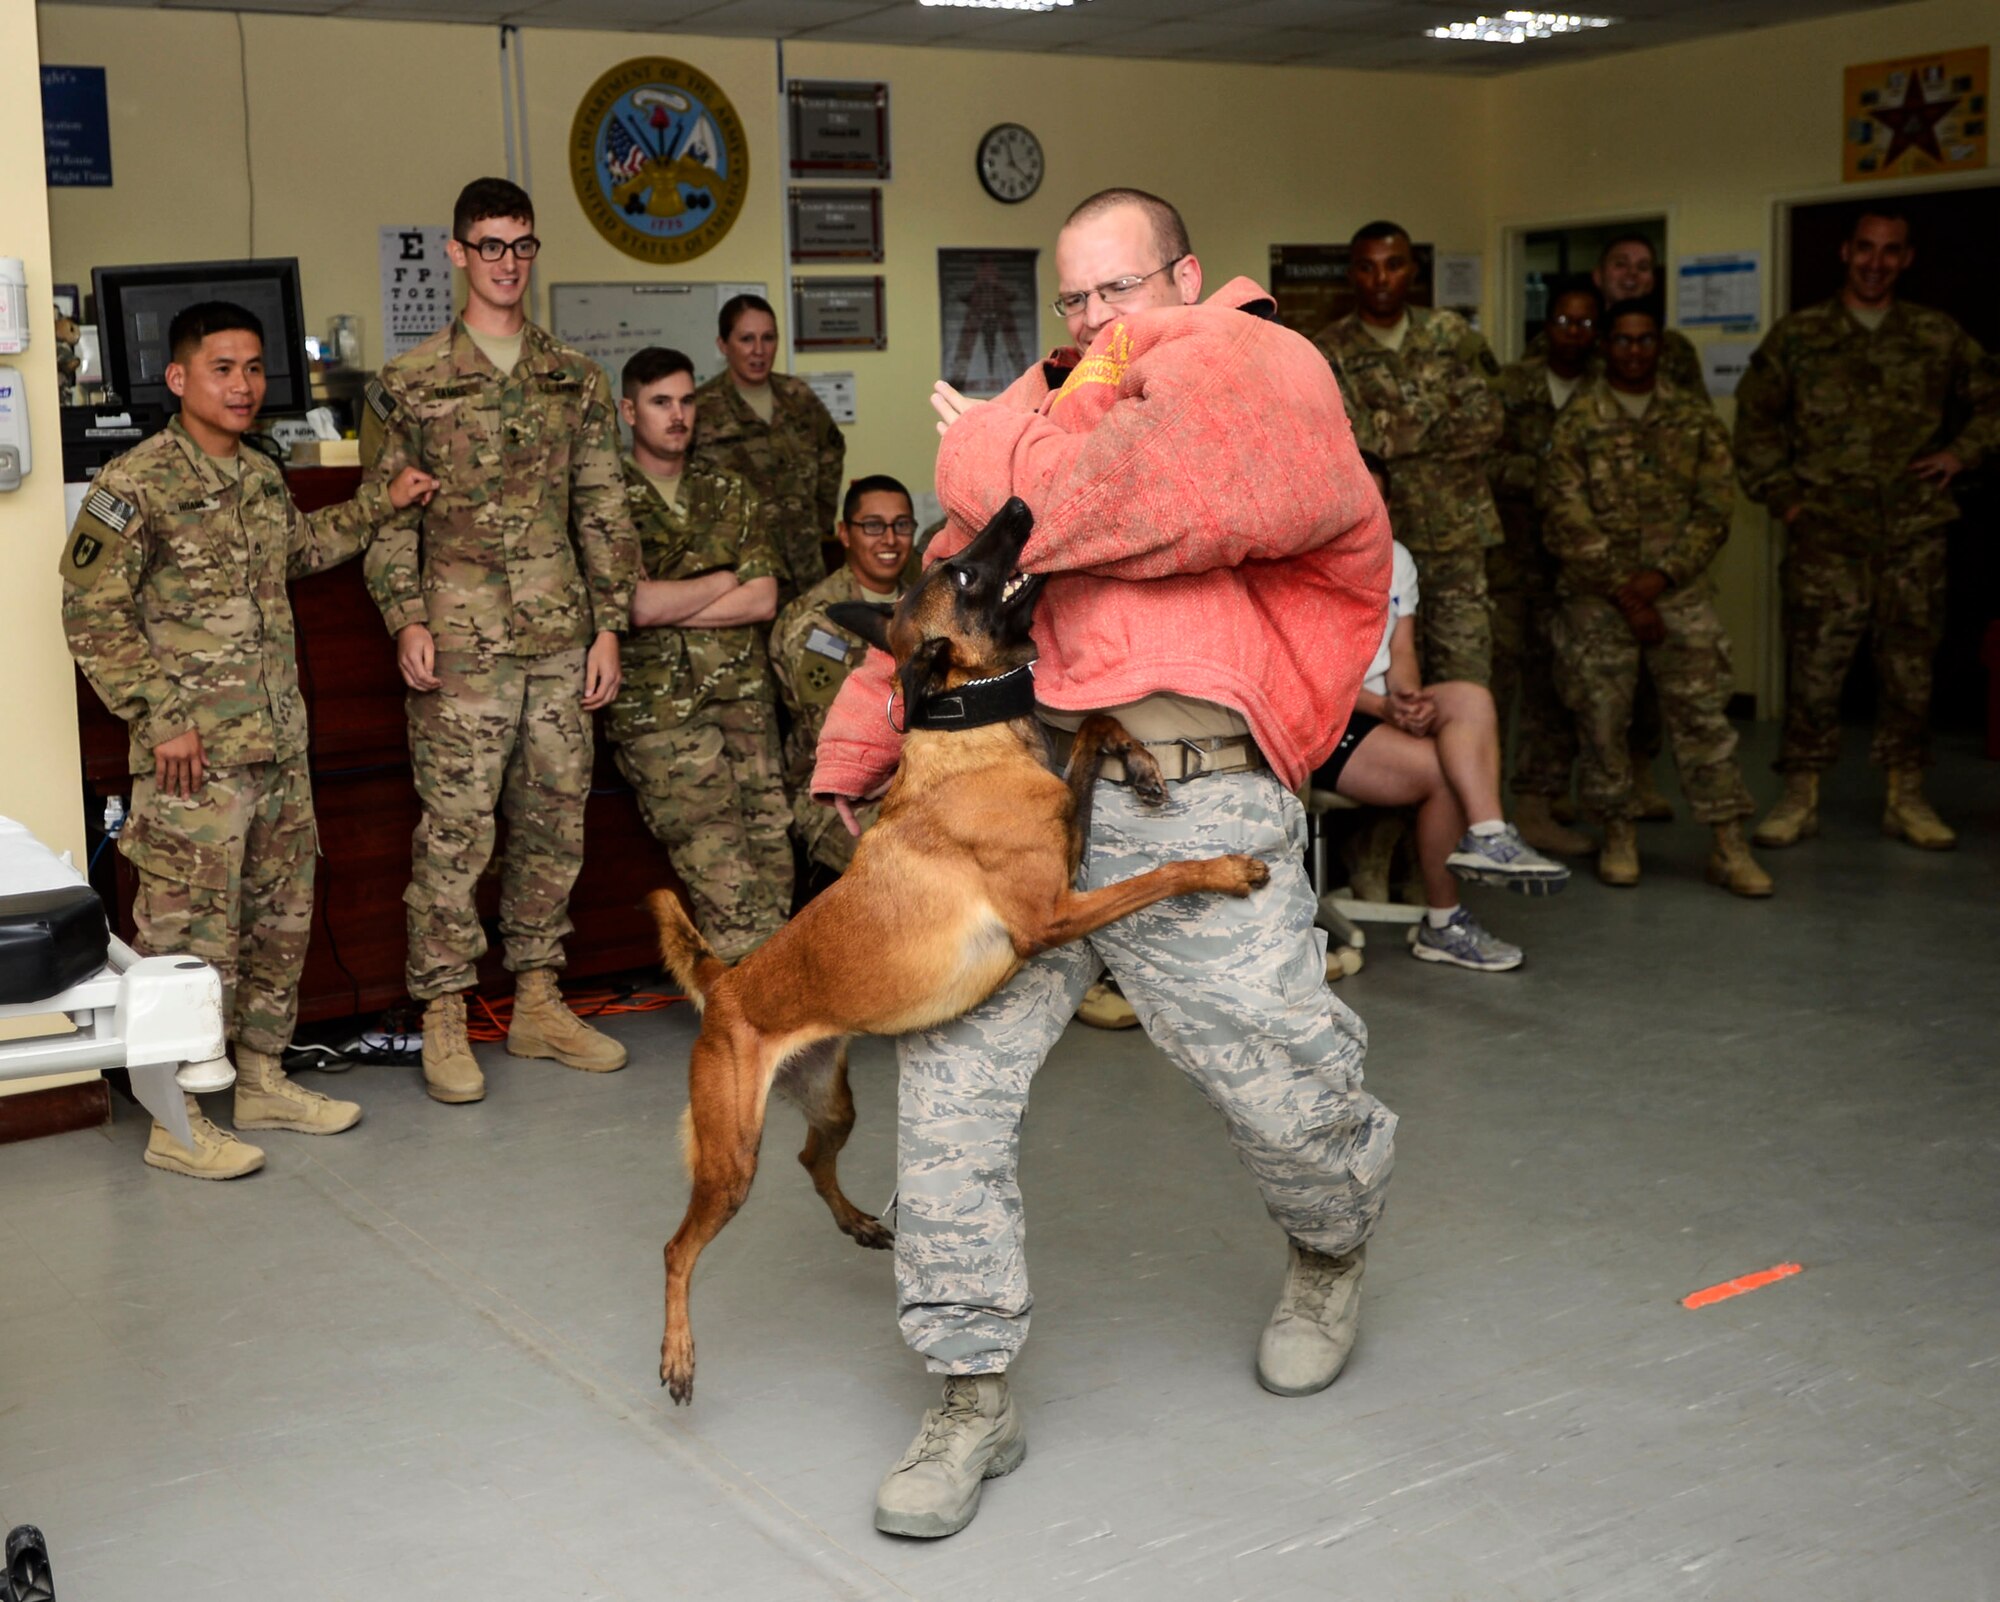 U.S. Air Force Staff Sgt. Kurtis Buchawiecki, 386th Expeditionary Security Forces Squadron Military Working Dog handler, does a MWD demonstration with GGreta, 386 ESFS MWD, after  emergency medical training at an undisclosed location in Southwest Asia, Sept. 12, 2015. Buchawiecki demonstrated and talked about some of the capabilities MWDs help in the fight against the Islamic State or ISIL. (U.S. Air Force photo by Senior Airman Racheal E. Watson/Released)